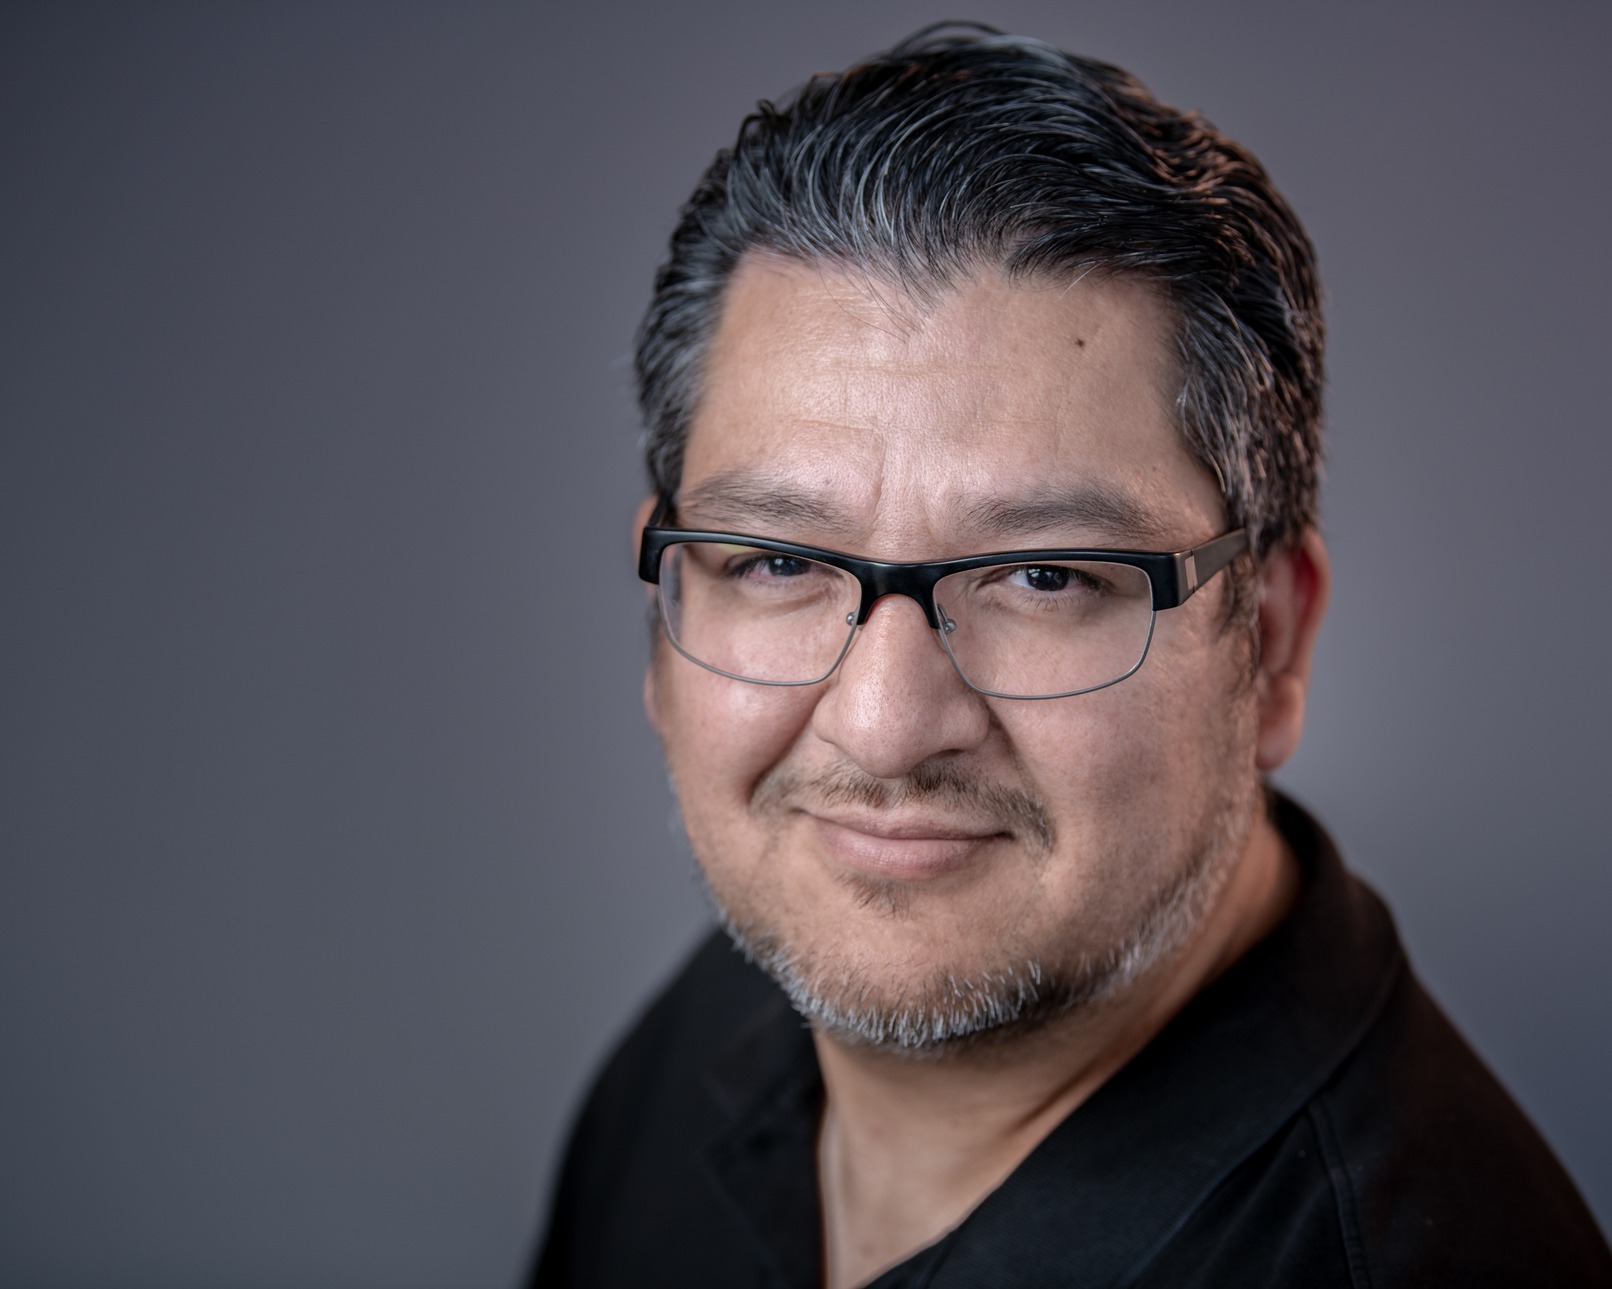 Carlos Hernandez Elected as President of the AIA Long Beach/Southbay Chapter